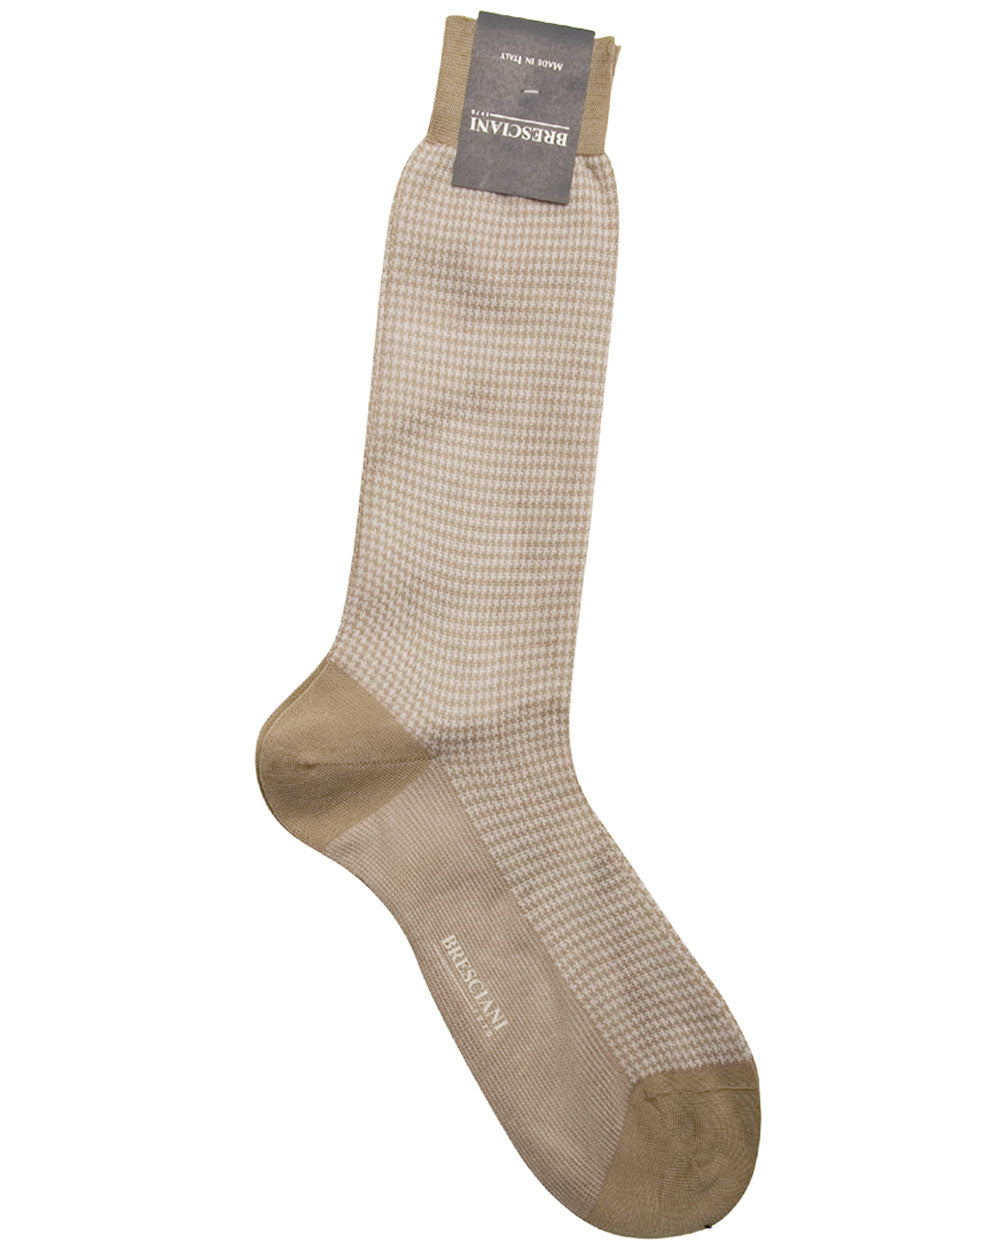 Beige and White Houndstooth Midcalf Sock